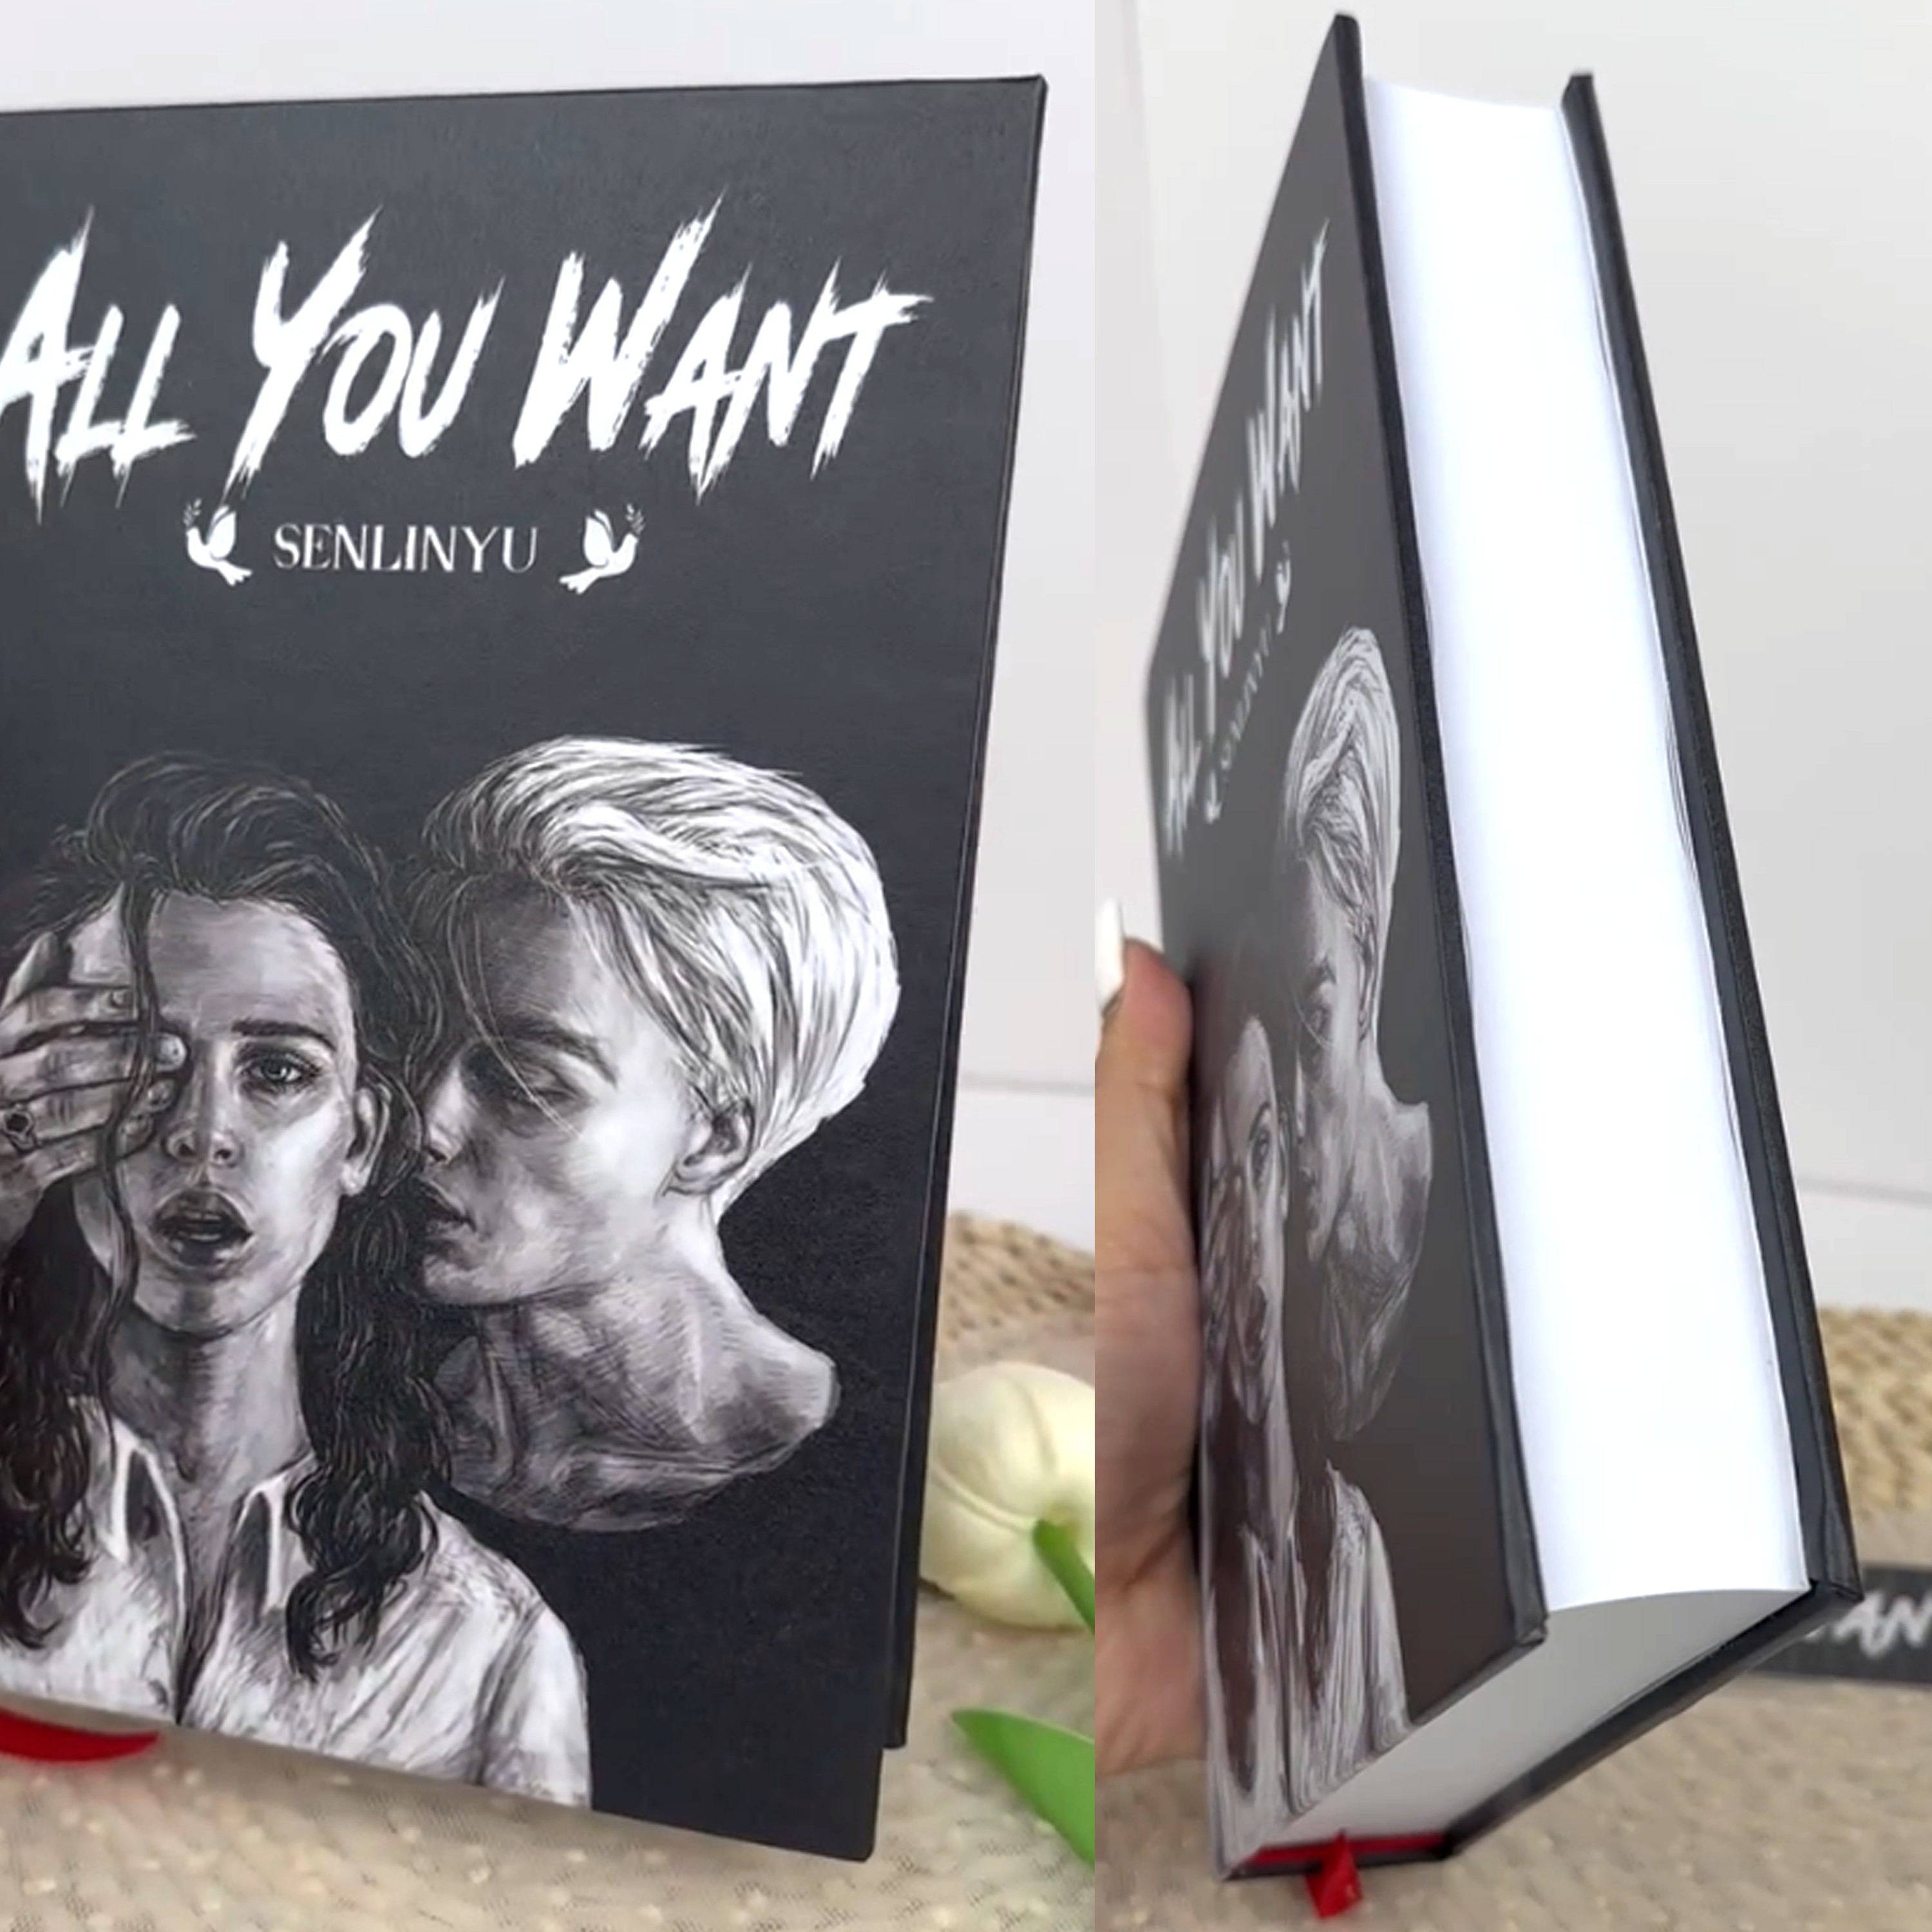 All You Want Books By SenLinYu, Deluxe Edition with Illustrations - Complete Series. Exclusive bookmark included